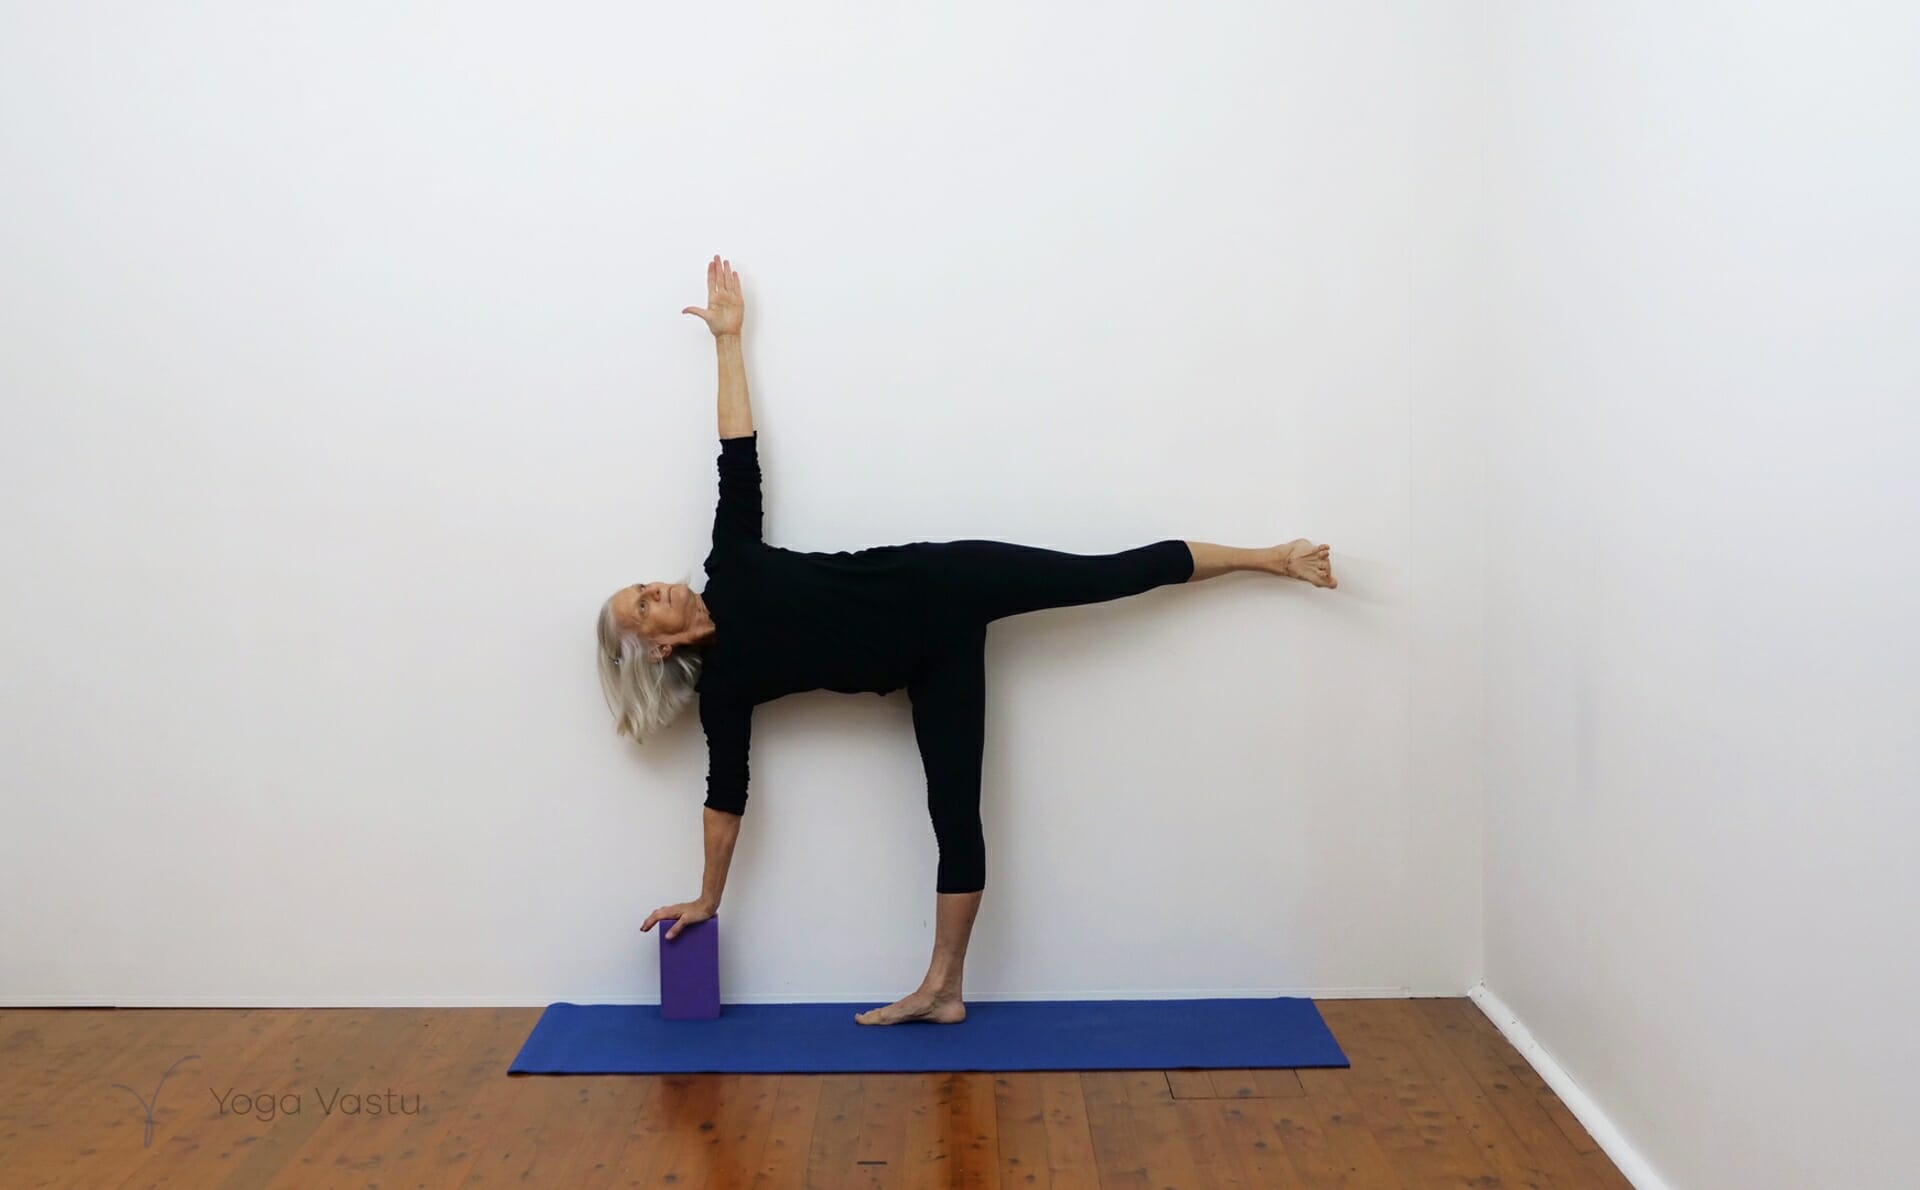 Standing Yoga Poses: Home Practice from Yoga Journal - YouTube